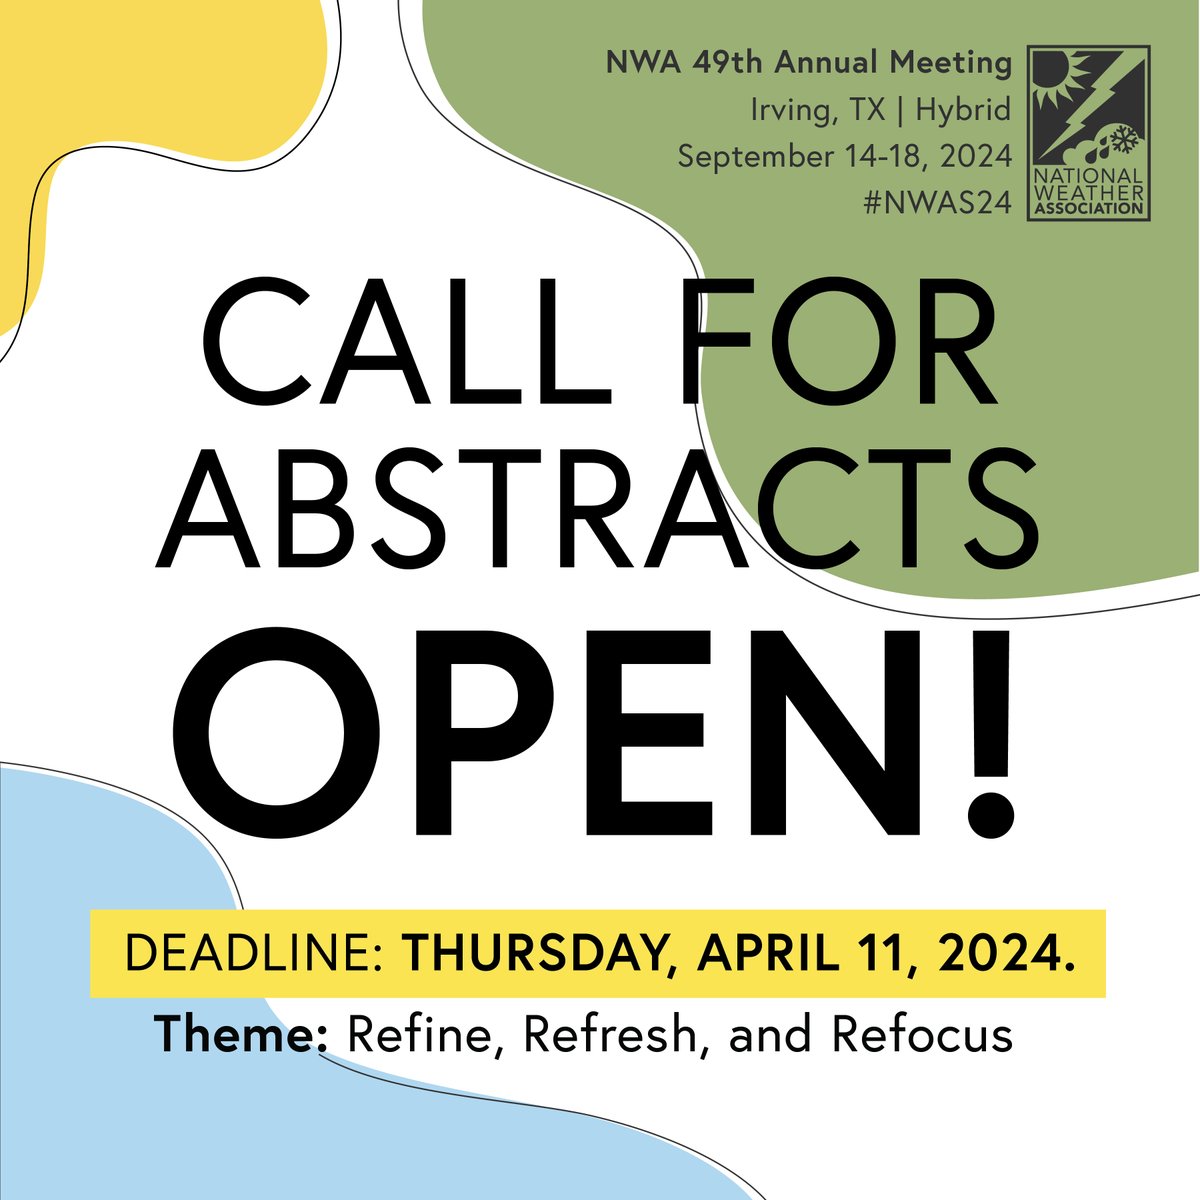 ‼ It's the LAST DAY to submit abstracts for the Annual Meeting ⏰Deadline: TODAY, April 11. 💻Visit our Annual Meeting page for more information: nwas.org/2024-annual-me…